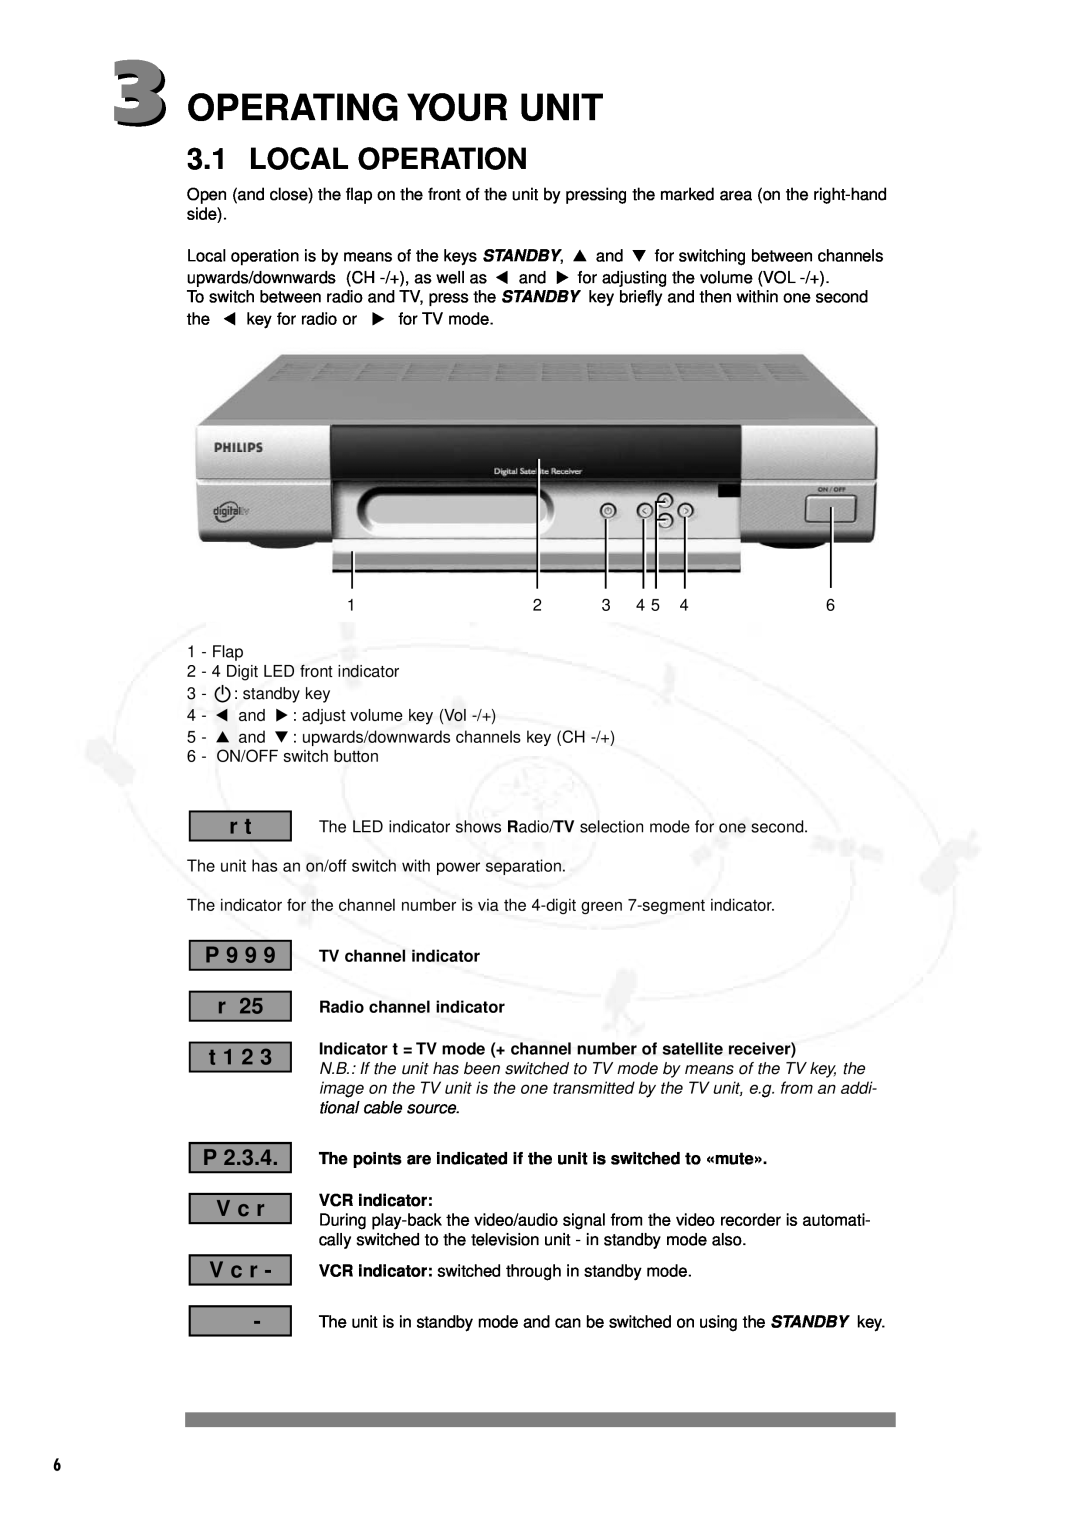 Philips IT-DSR1000/S, DSR 1000 Operating Your Unit, Local Operation, P 9 9 r 25 t 1 2 P 2.3.4. V c r V c r, VCR indicator 